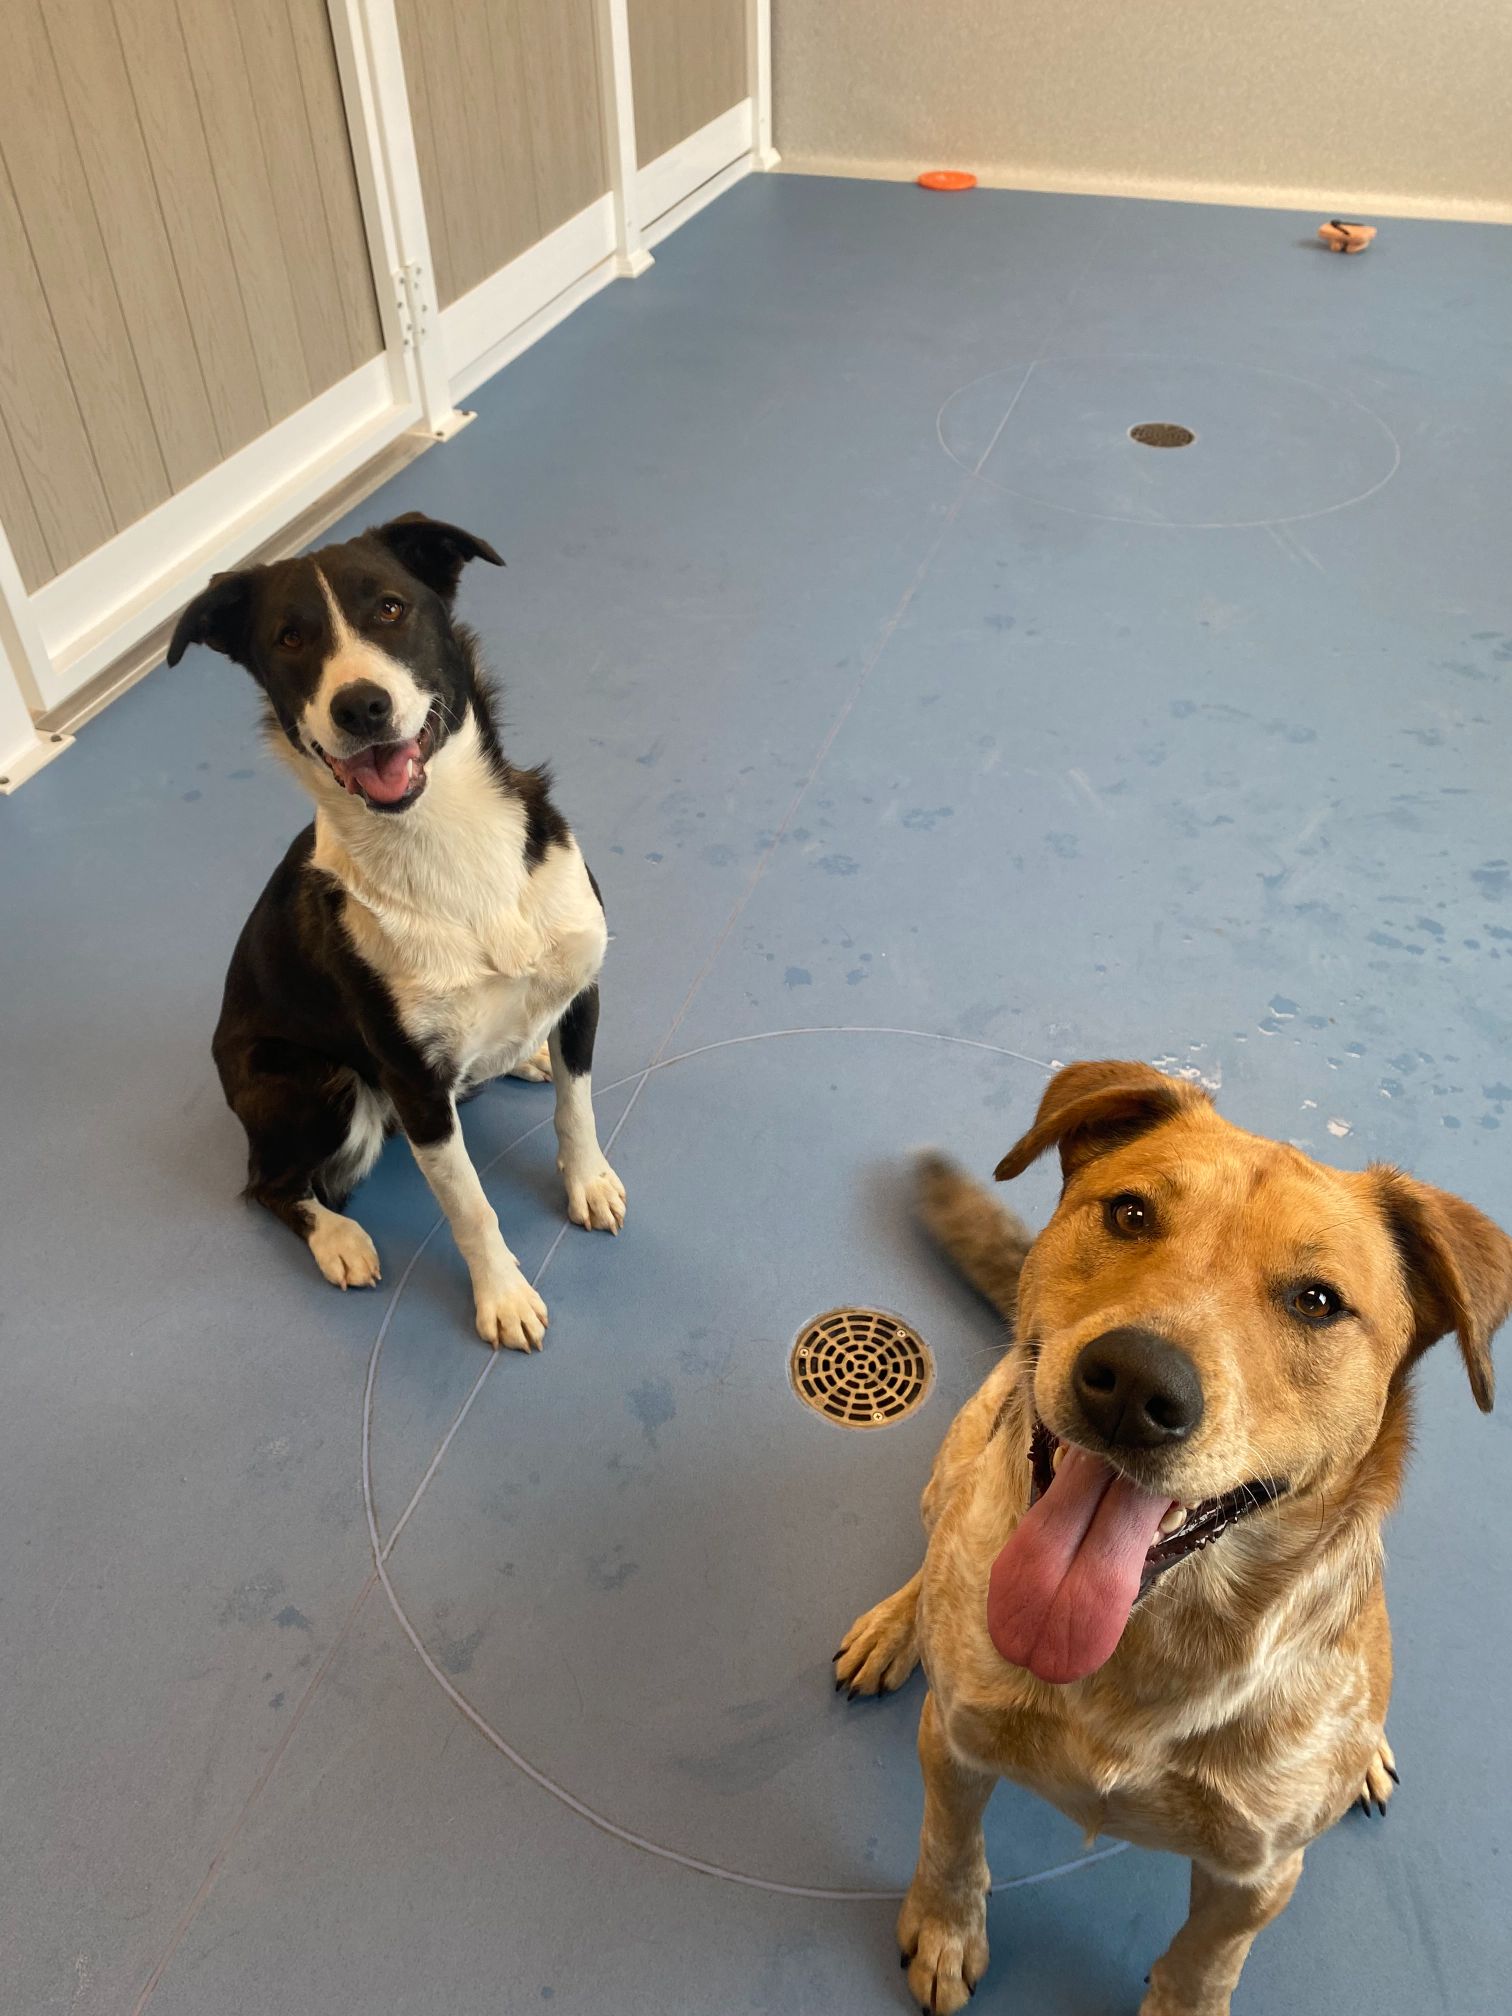 Dogs in clinic play area